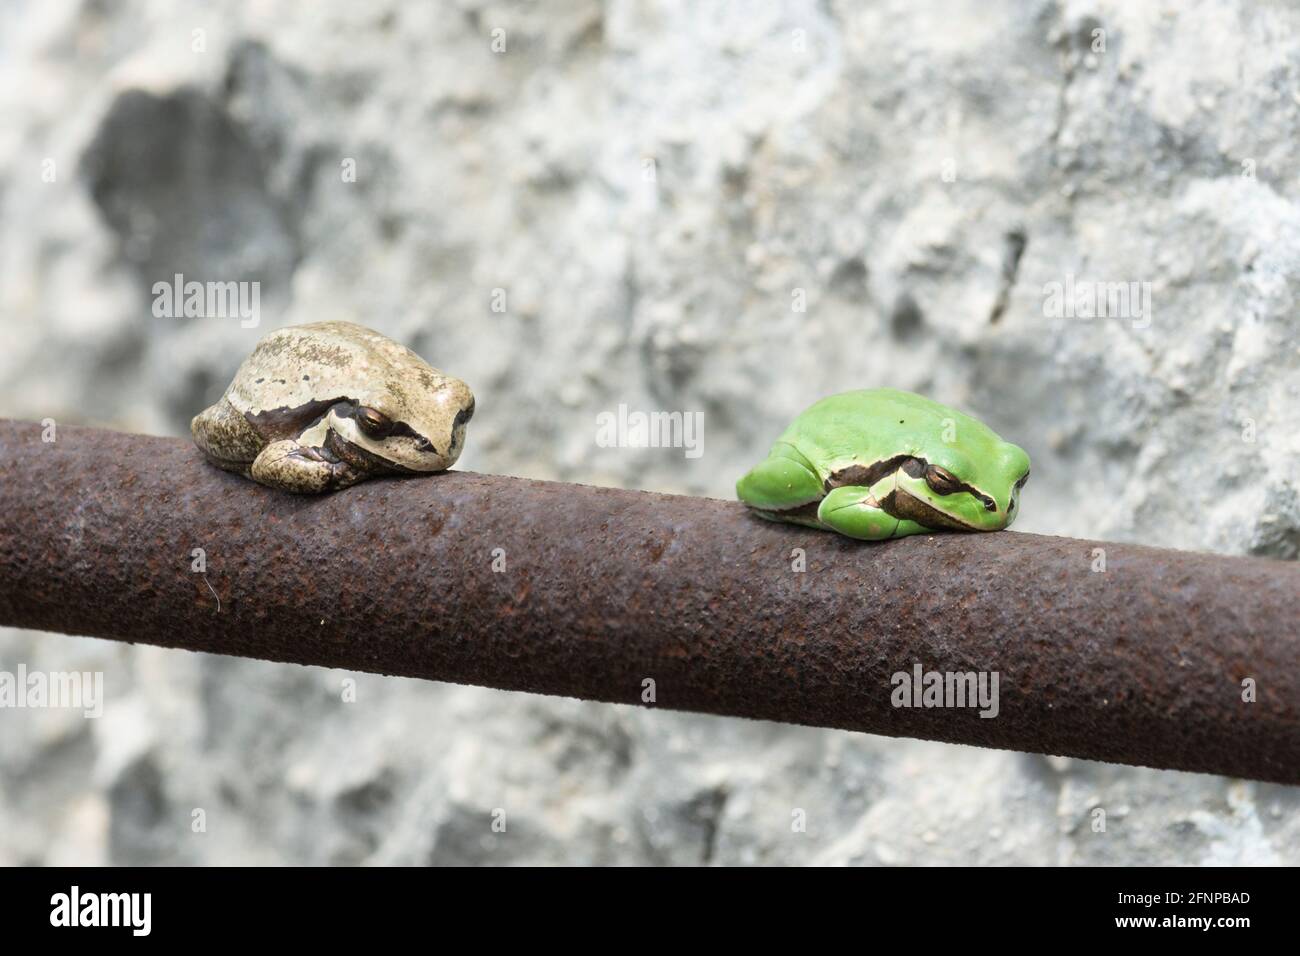 Green and white Middle east tree frogs on a steel bar, Hyla savignyi Stock Photo